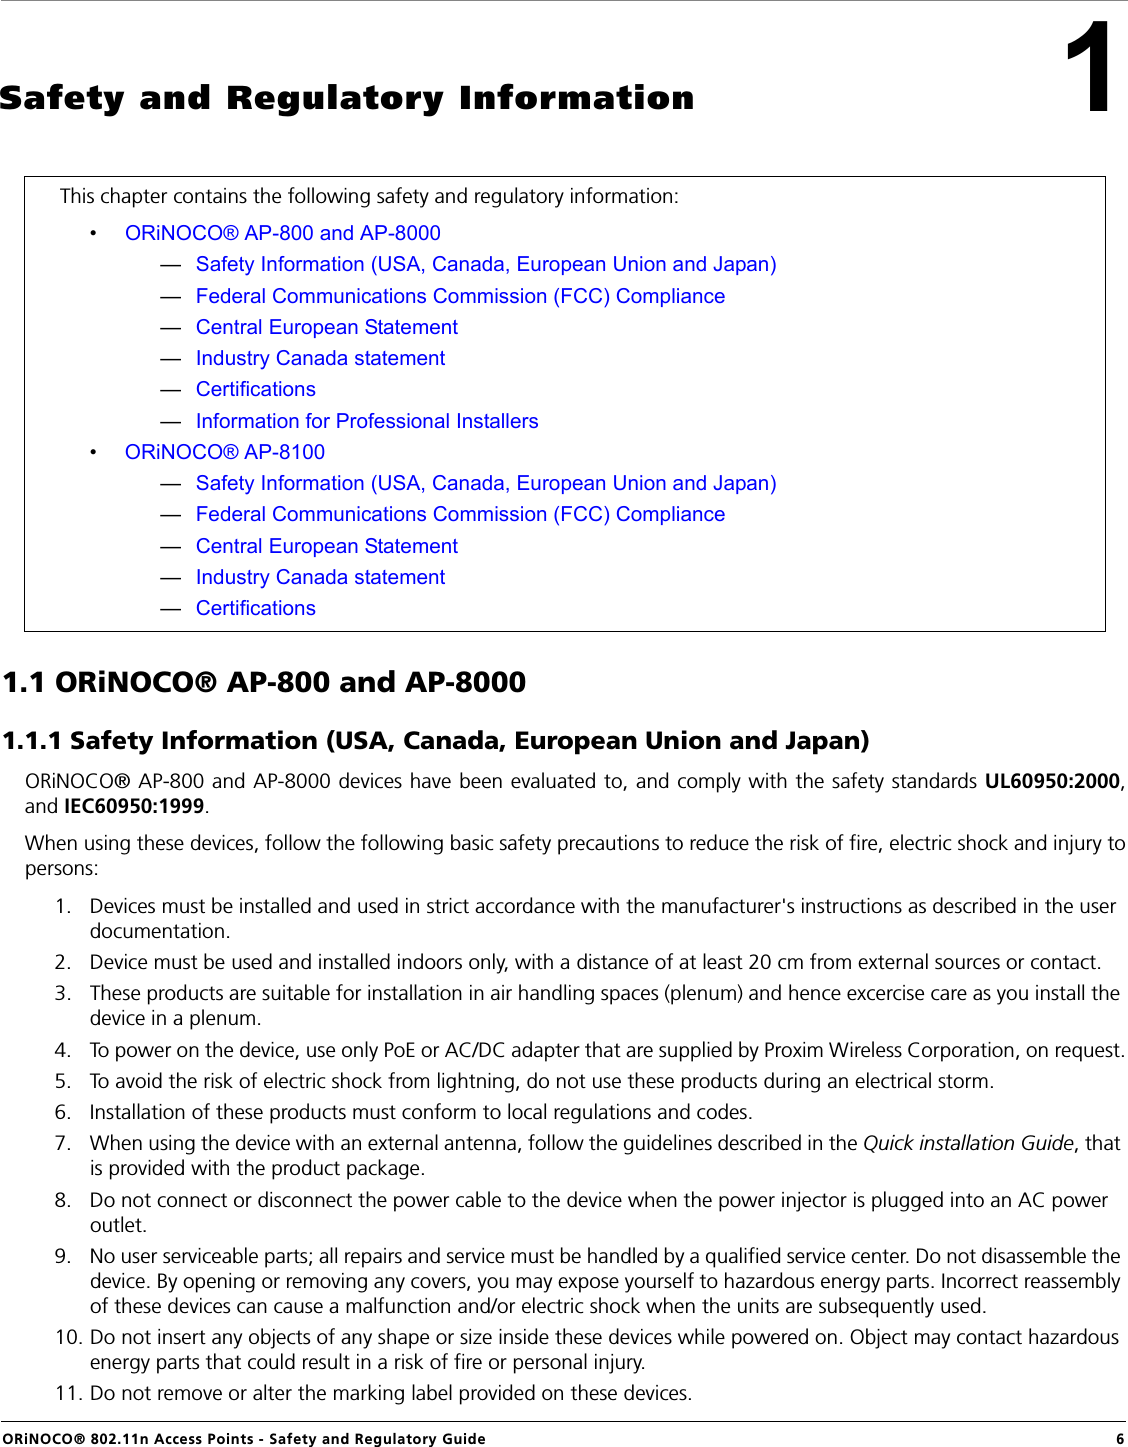 ORiNOCO® 802.11n Access Points - Safety and Regulatory Guide  61Safety and Regulatory Information1.1 ORiNOCO® AP-800 and AP-80001.1.1 Safety Information (USA, Canada, European Union and Japan)ORiNOCO® AP-800 and AP-8000 devices have been evaluated to, and comply with the safety standards UL60950:2000,and IEC60950:1999. When using these devices, follow the following basic safety precautions to reduce the risk of fire, electric shock and injury topersons:1. Devices must be installed and used in strict accordance with the manufacturer&apos;s instructions as described in the user documentation.2. Device must be used and installed indoors only, with a distance of at least 20 cm from external sources or contact.3. These products are suitable for installation in air handling spaces (plenum) and hence excercise care as you install the device in a plenum.4. To power on the device, use only PoE or AC/DC adapter that are supplied by Proxim Wireless Corporation, on request.5. To avoid the risk of electric shock from lightning, do not use these products during an electrical storm.6. Installation of these products must conform to local regulations and codes.7. When using the device with an external antenna, follow the guidelines described in the Quick installation Guide, that is provided with the product package.8. Do not connect or disconnect the power cable to the device when the power injector is plugged into an AC power outlet.9. No user serviceable parts; all repairs and service must be handled by a qualified service center. Do not disassemble the device. By opening or removing any covers, you may expose yourself to hazardous energy parts. Incorrect reassembly of these devices can cause a malfunction and/or electric shock when the units are subsequently used.10. Do not insert any objects of any shape or size inside these devices while powered on. Object may contact hazardous energy parts that could result in a risk of fire or personal injury.11. Do not remove or alter the marking label provided on these devices.This chapter contains the following safety and regulatory information: •ORiNOCO® AP-800 and AP-8000—Safety Information (USA, Canada, European Union and Japan)—Federal Communications Commission (FCC) Compliance—Central European Statement—Industry Canada statement—Certifications—Information for Professional Installers•ORiNOCO® AP-8100—Safety Information (USA, Canada, European Union and Japan)—Federal Communications Commission (FCC) Compliance—Central European Statement—Industry Canada statement—Certifications